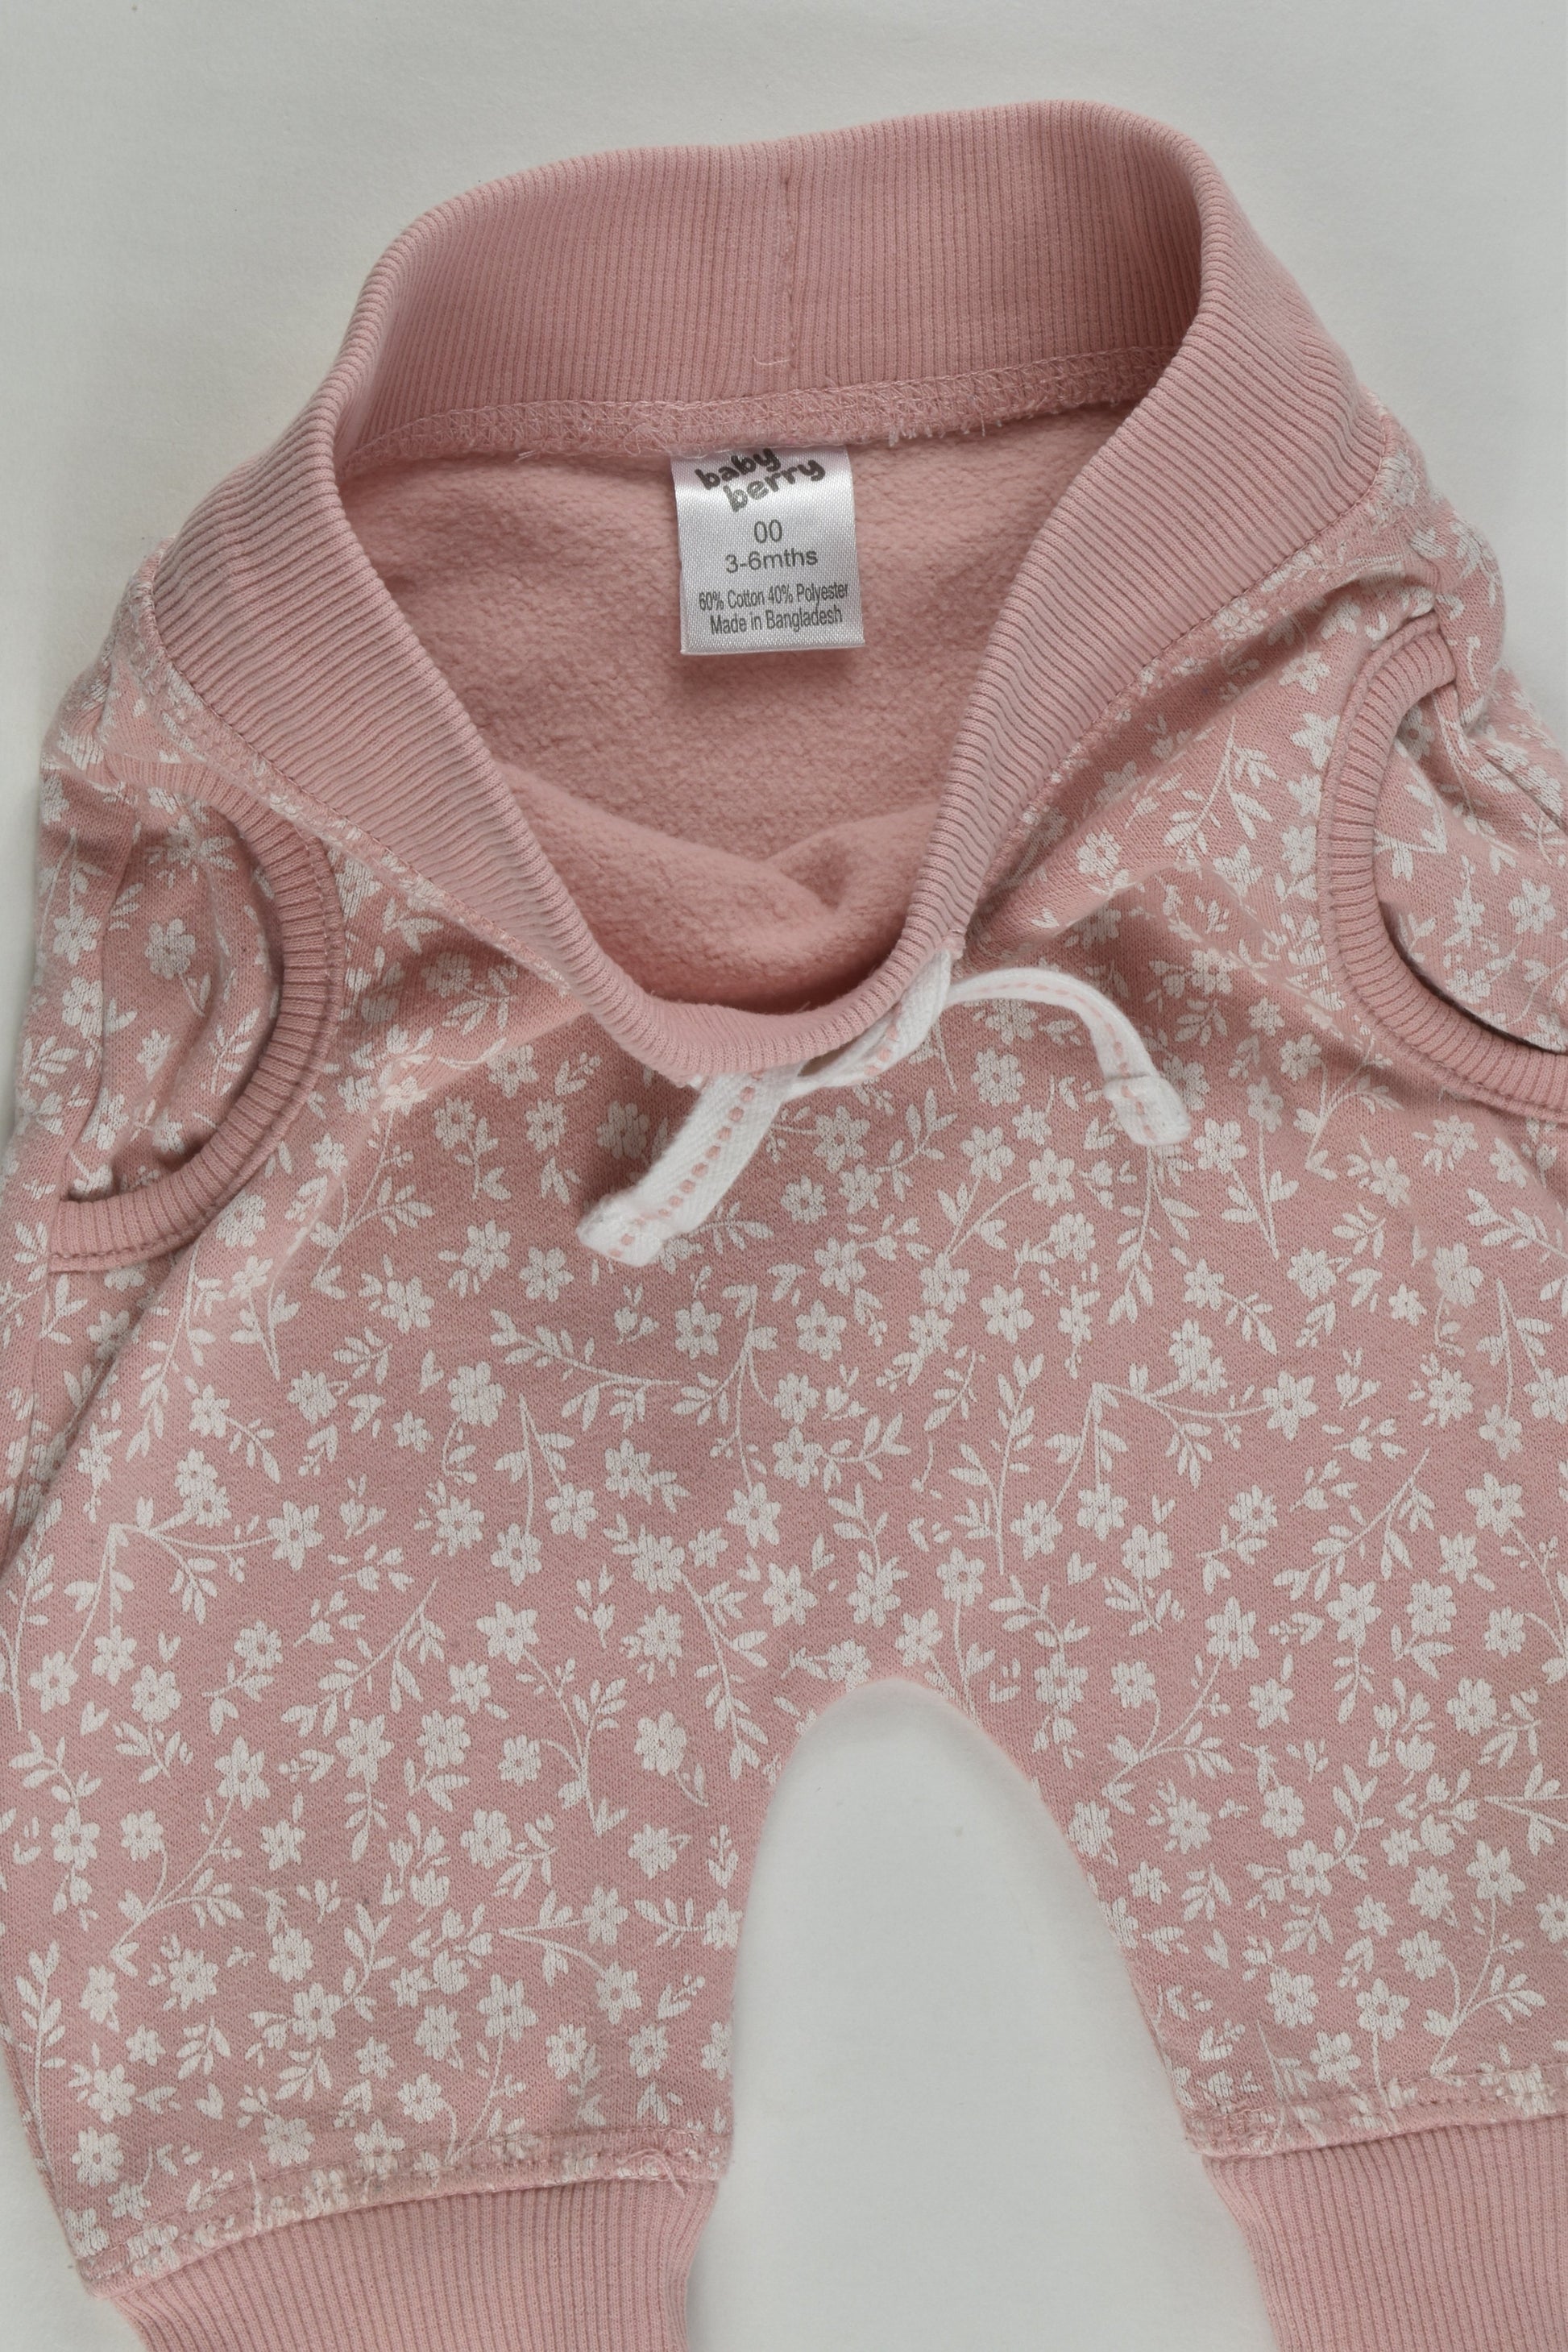 Baby Berry Size 00 (3-6 months) Floral Track Pants